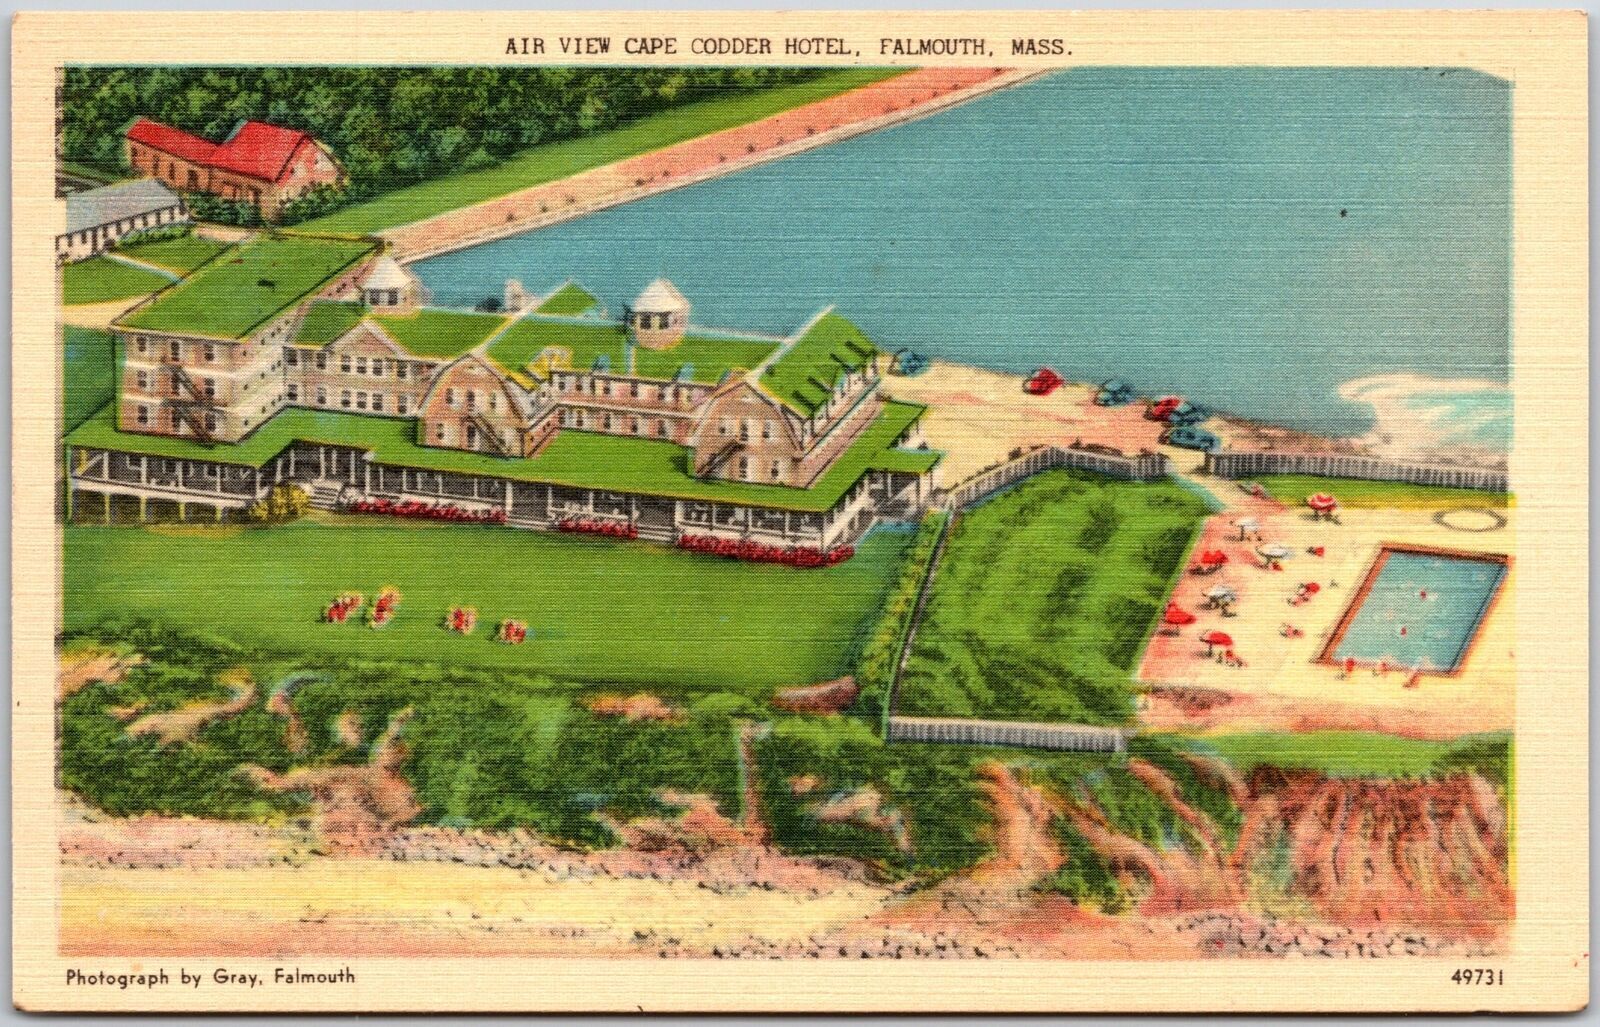 Airview Cape Codder Hotel Falmouth Massachusetts MA Aerial View Postcard